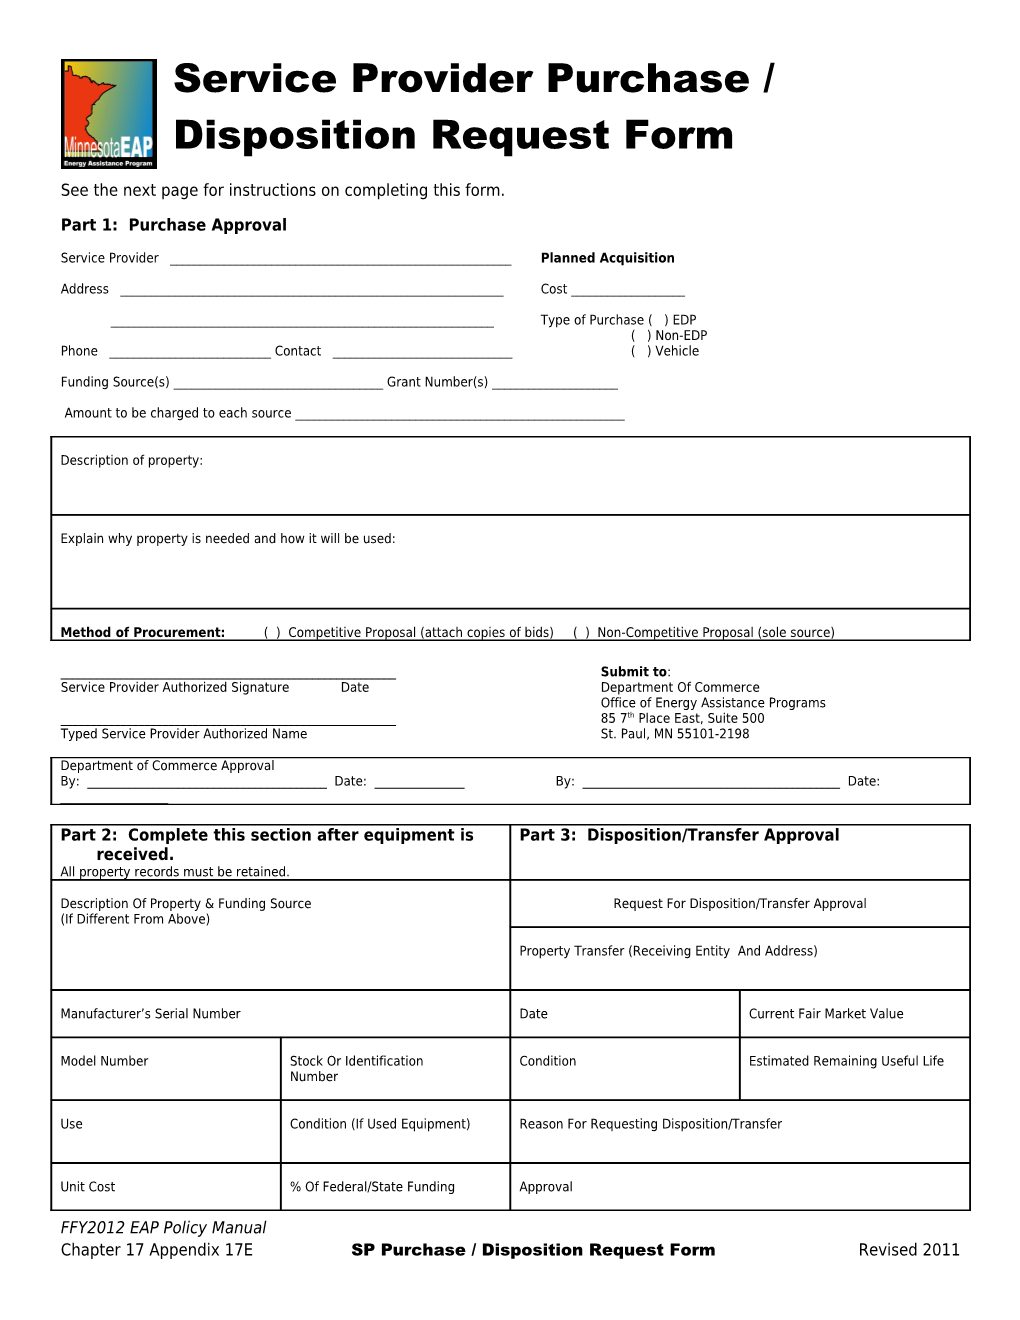 SP Purchase Disposition Request Form